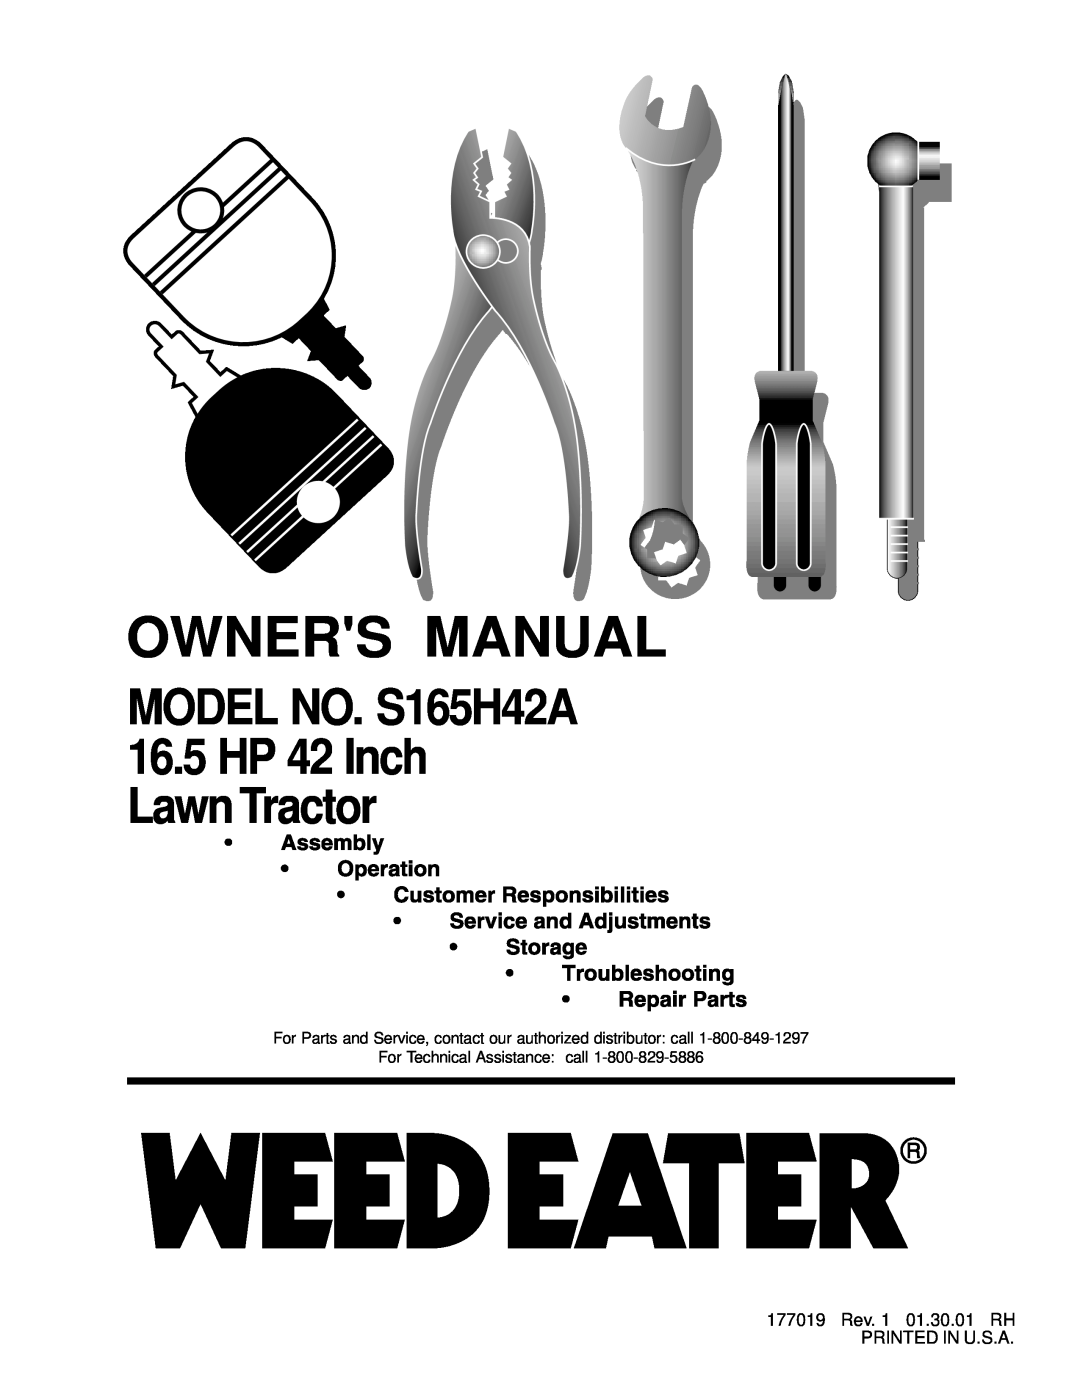 Weed Eater owner manual MODEL NO. S165H42A 16.5HP 42 Inch Lawn Tractor 